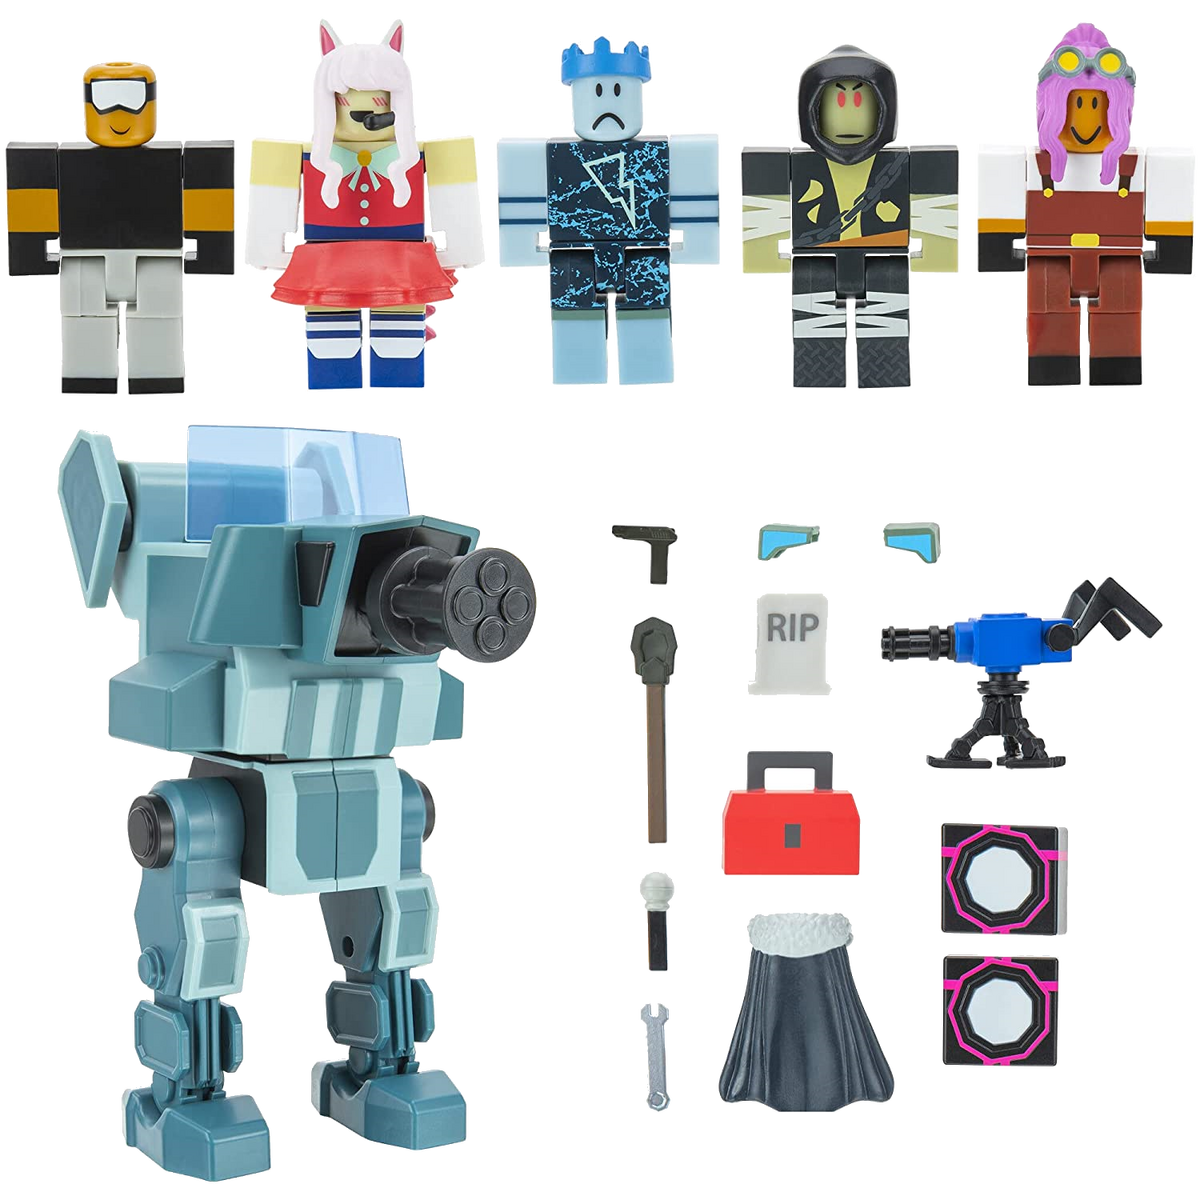 Roblox Multipack - Figurines Tower Defense - Simulateur : Cyber City